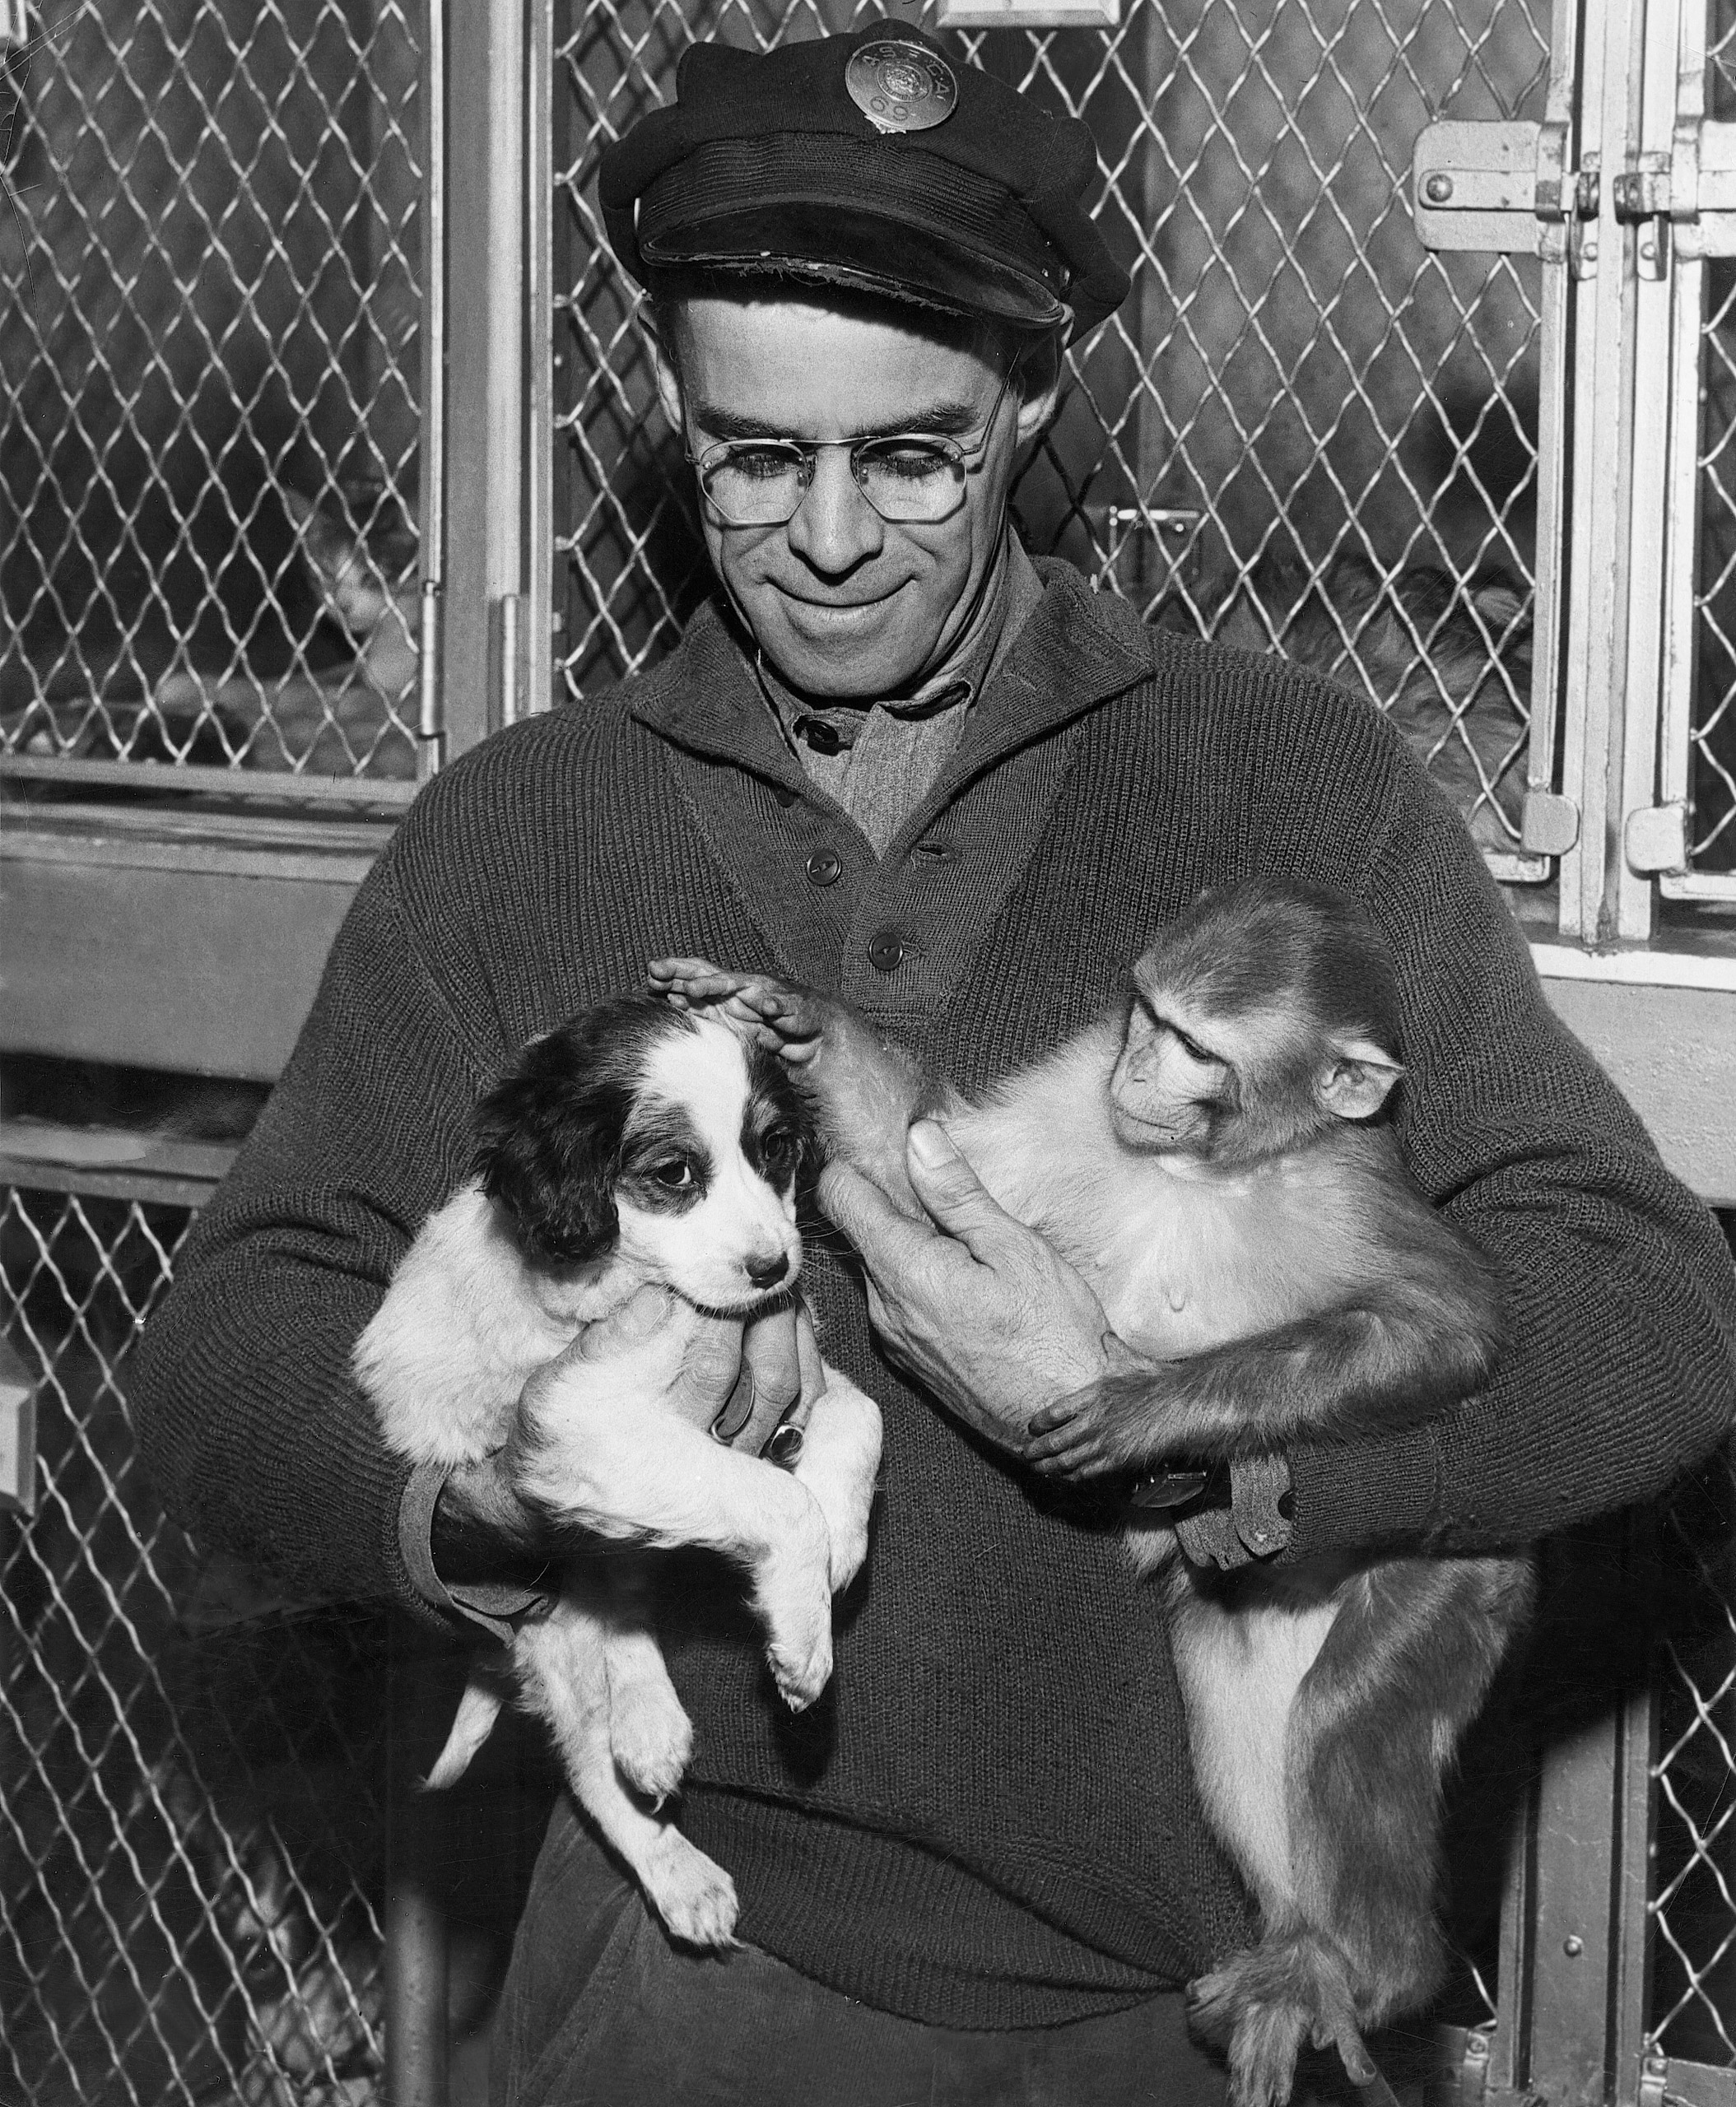 ASPCA agent cares for dog and monkey at the ASPCA Animal Port at Idlewild (John F. Kennedy) Airport, 1960s.